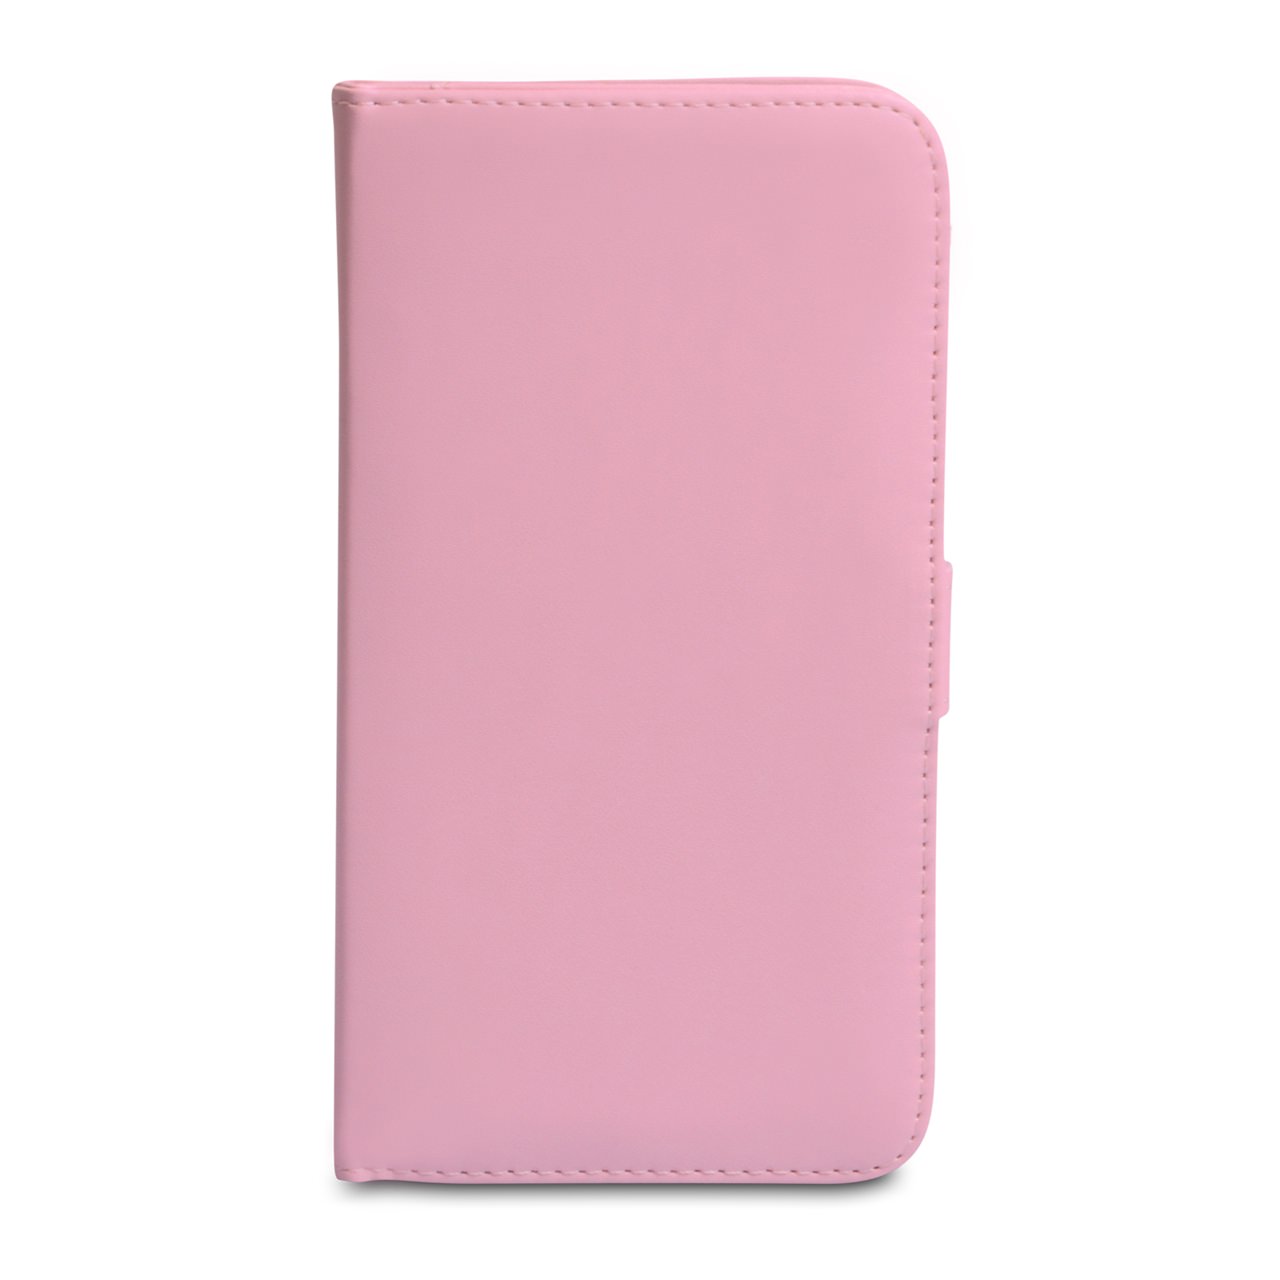 YouSave Samsung Galaxy Mega 6.3 Leather Effect Wallet Case - Baby Pink